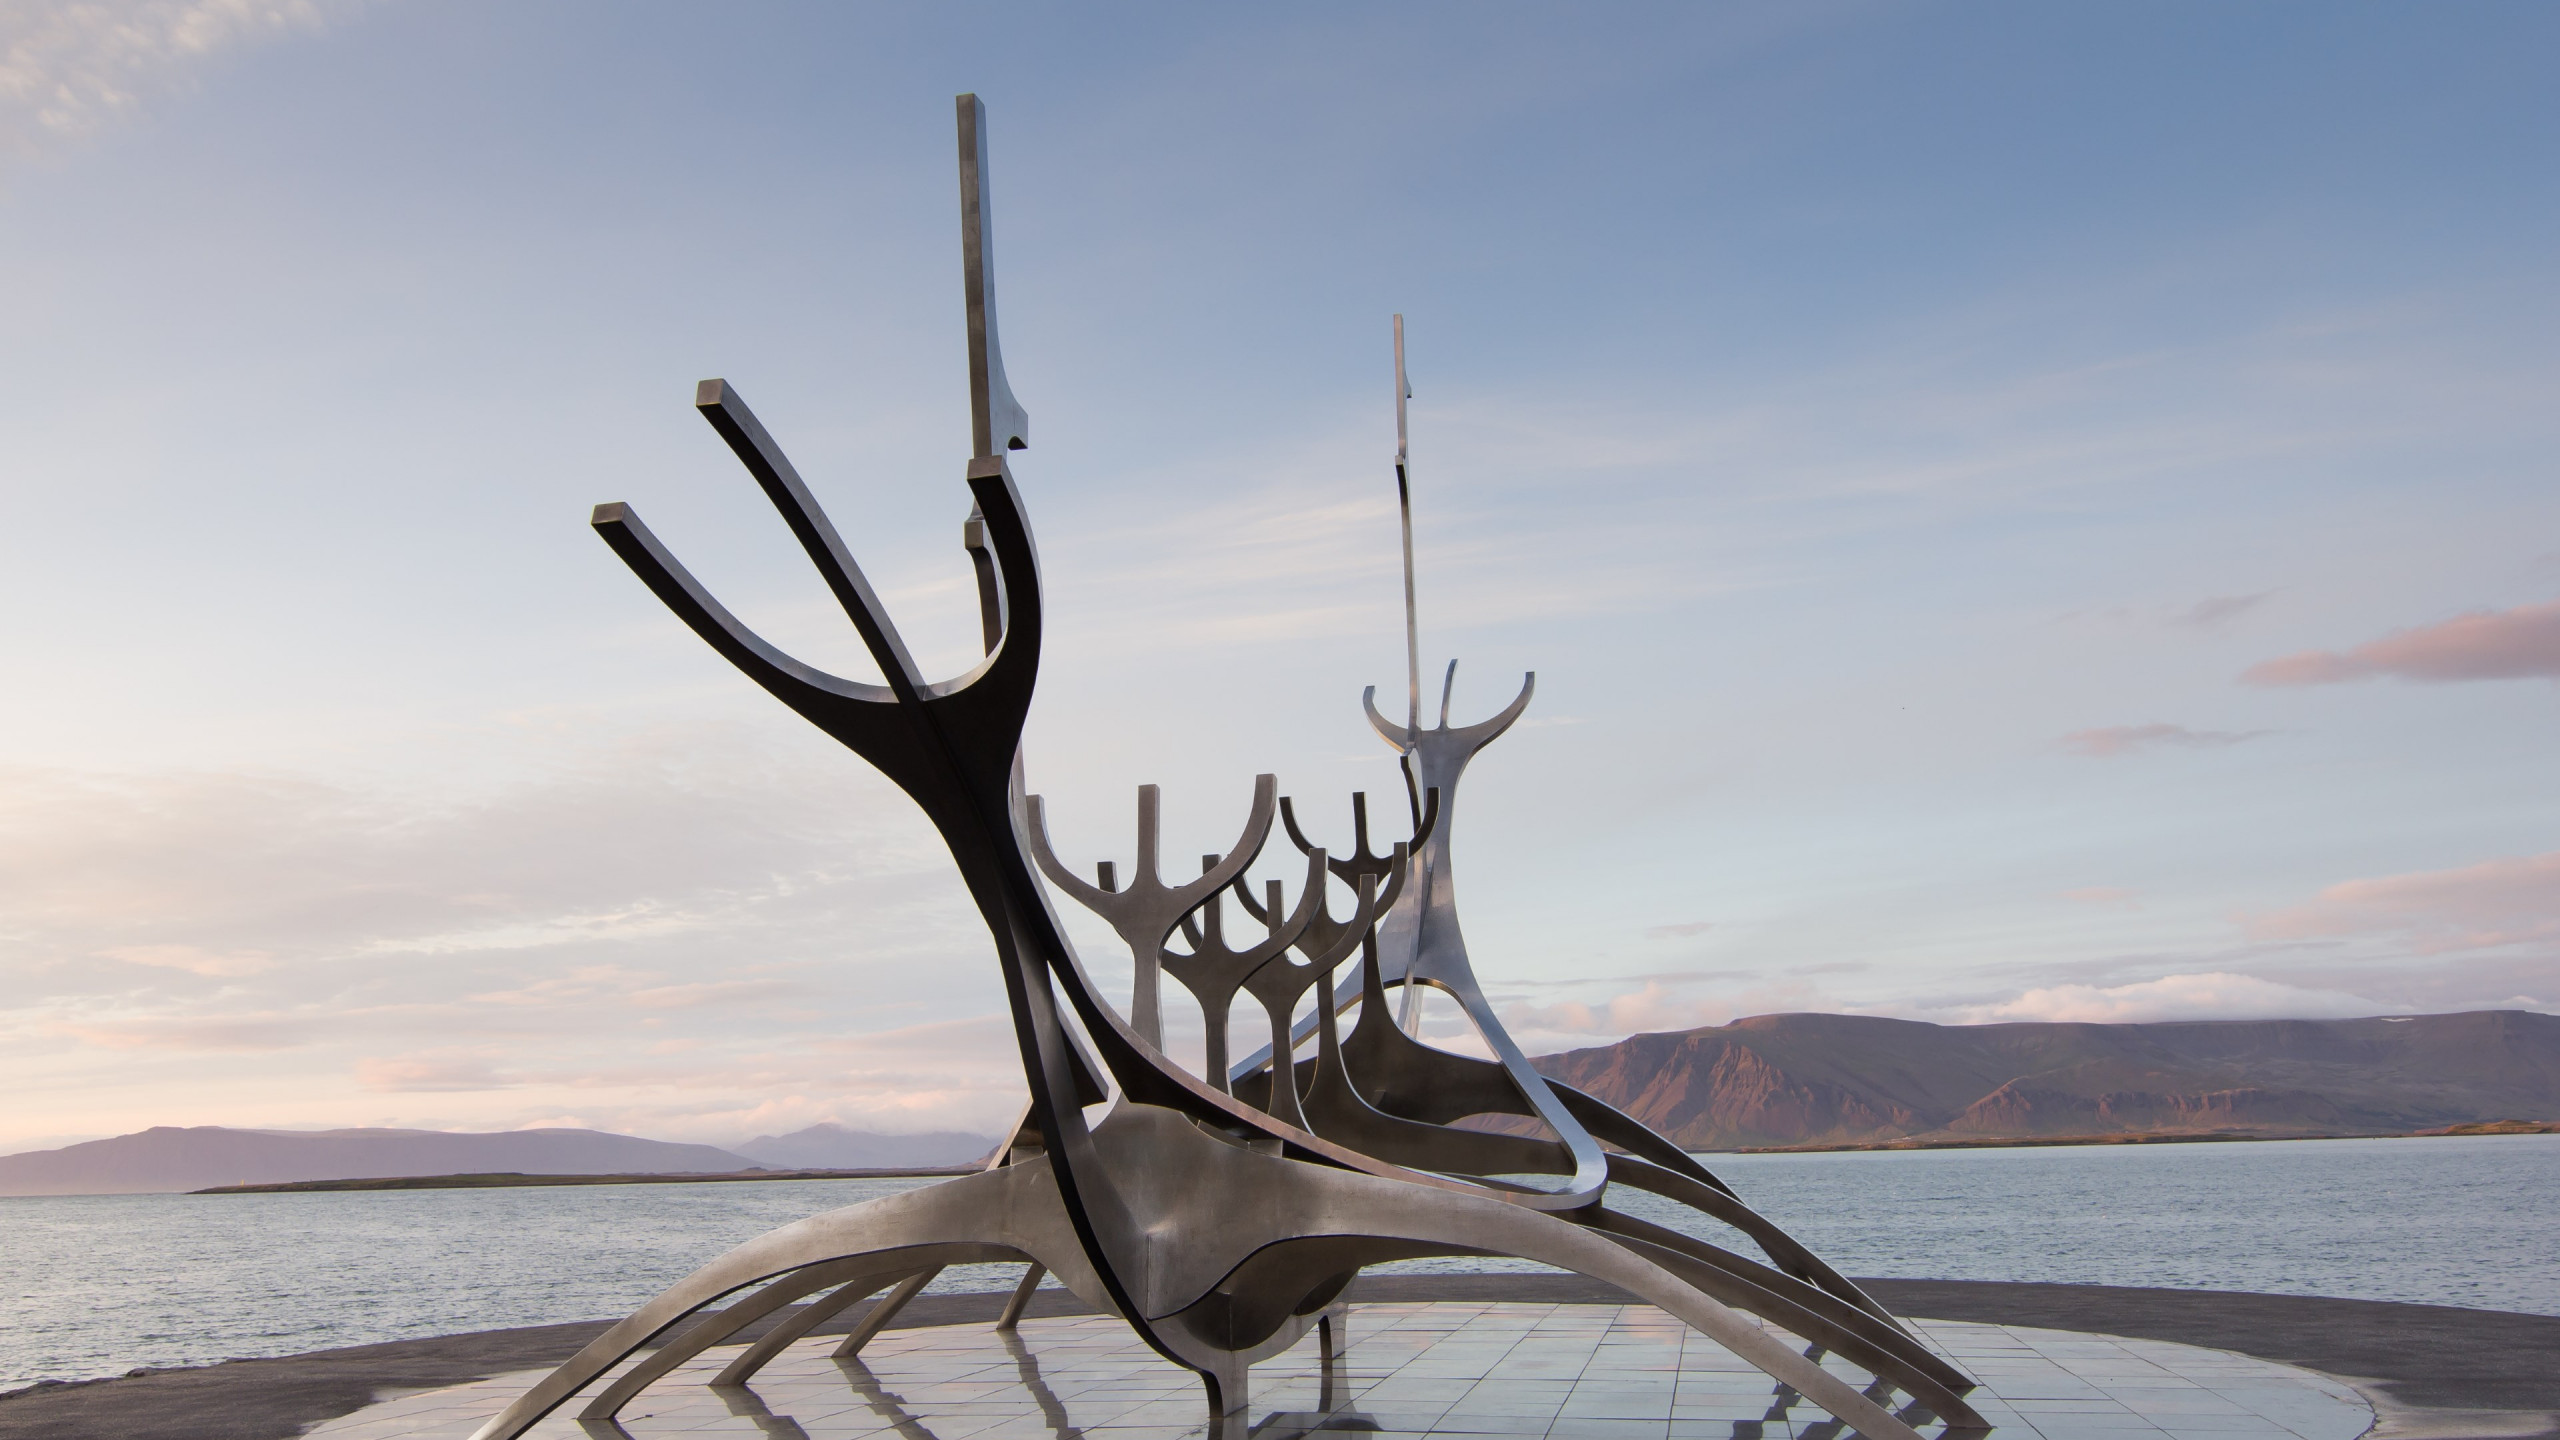 The Sun Voyager from Reykjavik, Iceland wallpaper 2560x1440